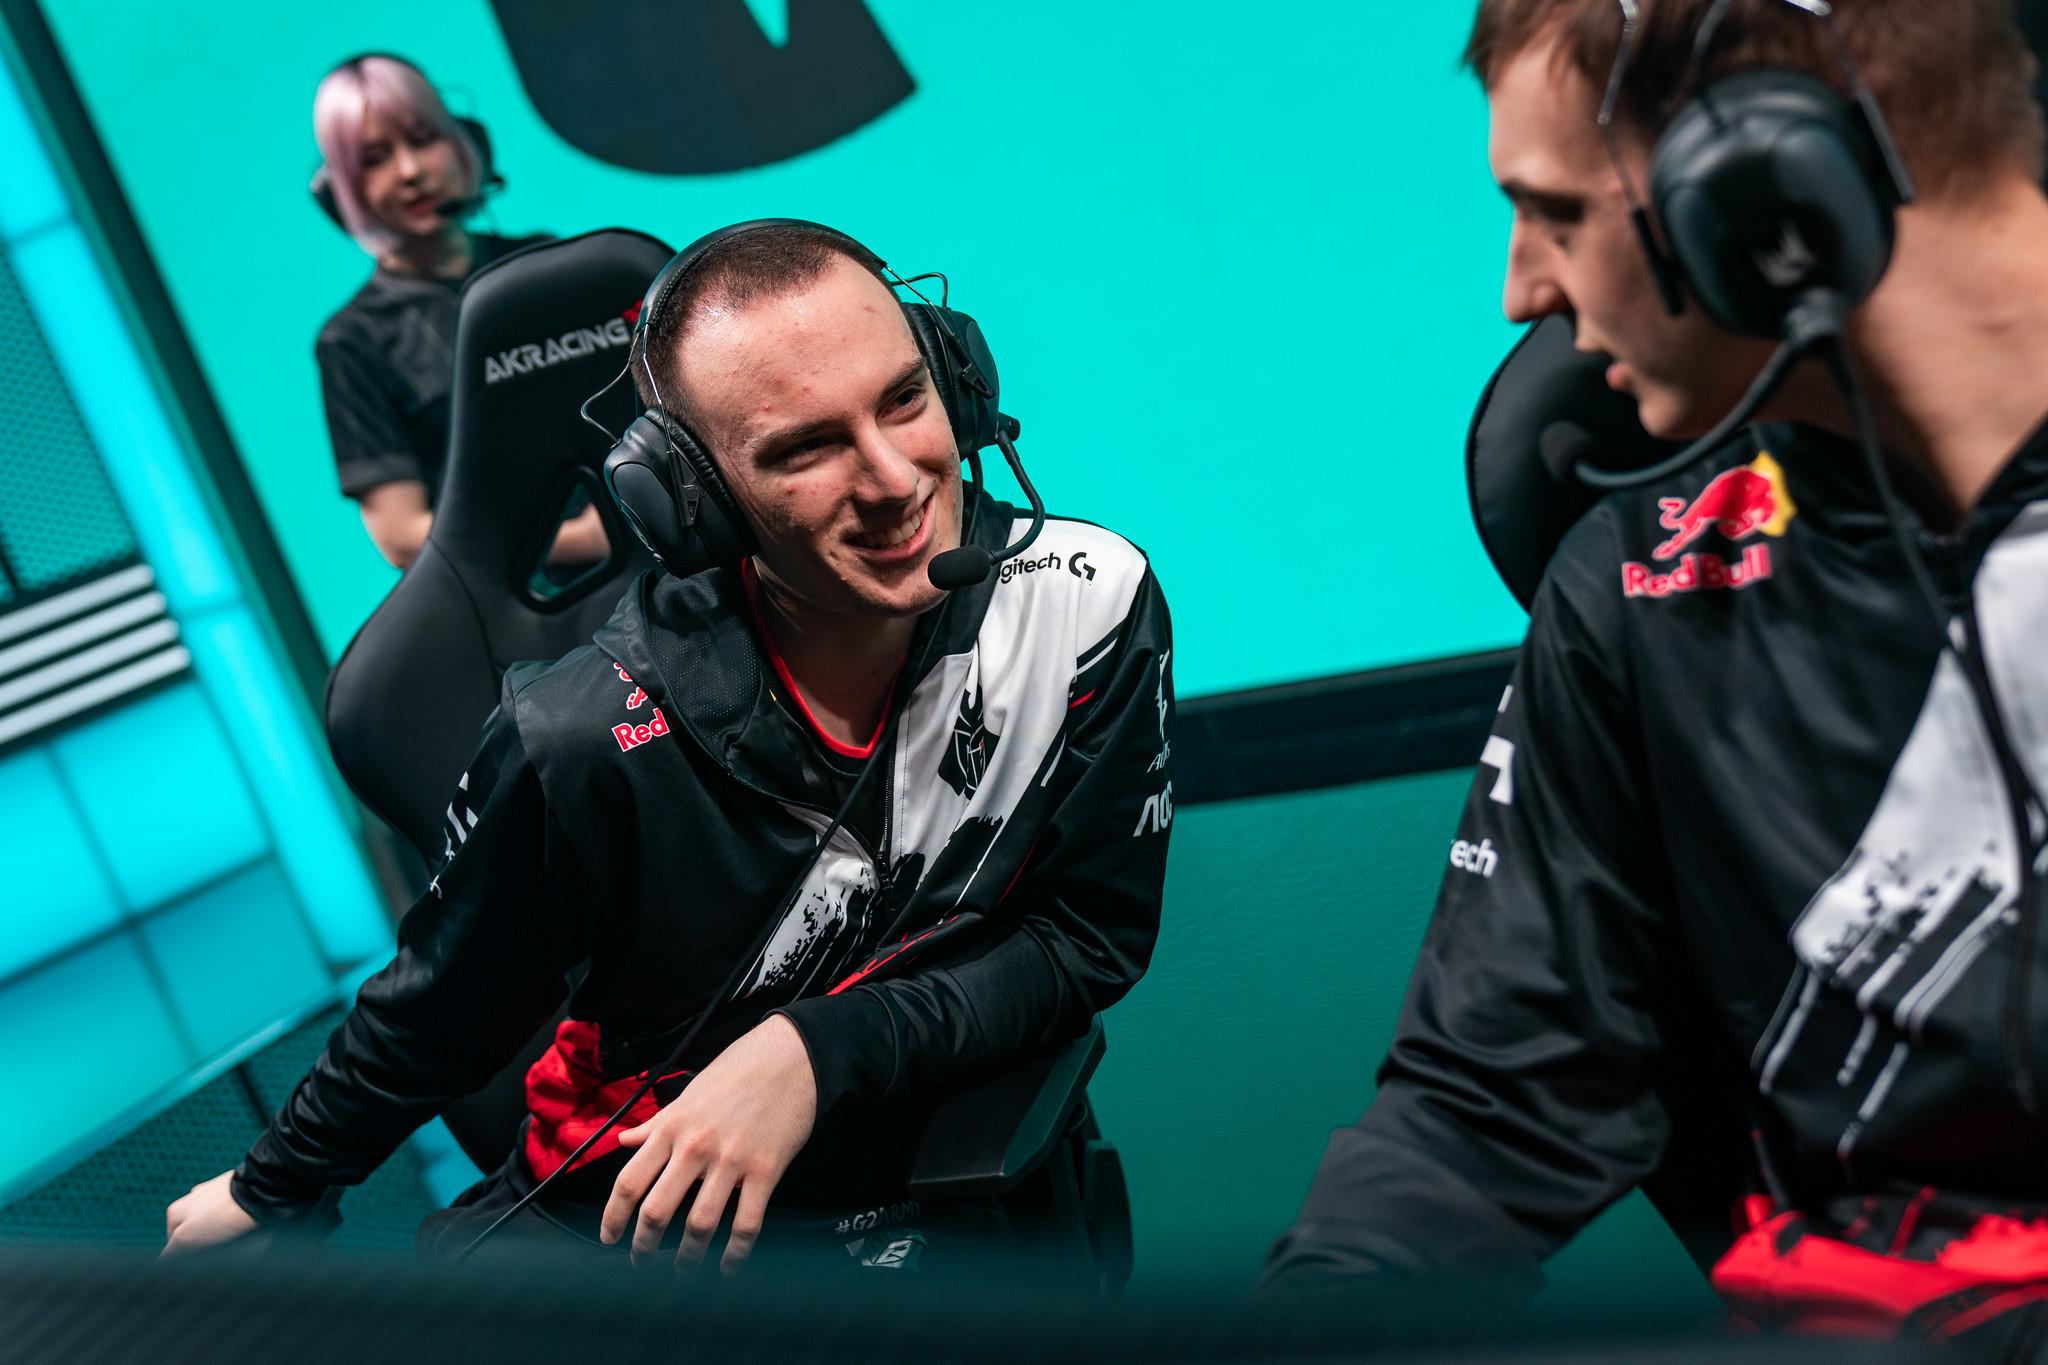 G2 Esports superstars Perkz and Caps have become one of the most feared carry duos in League of Legends.